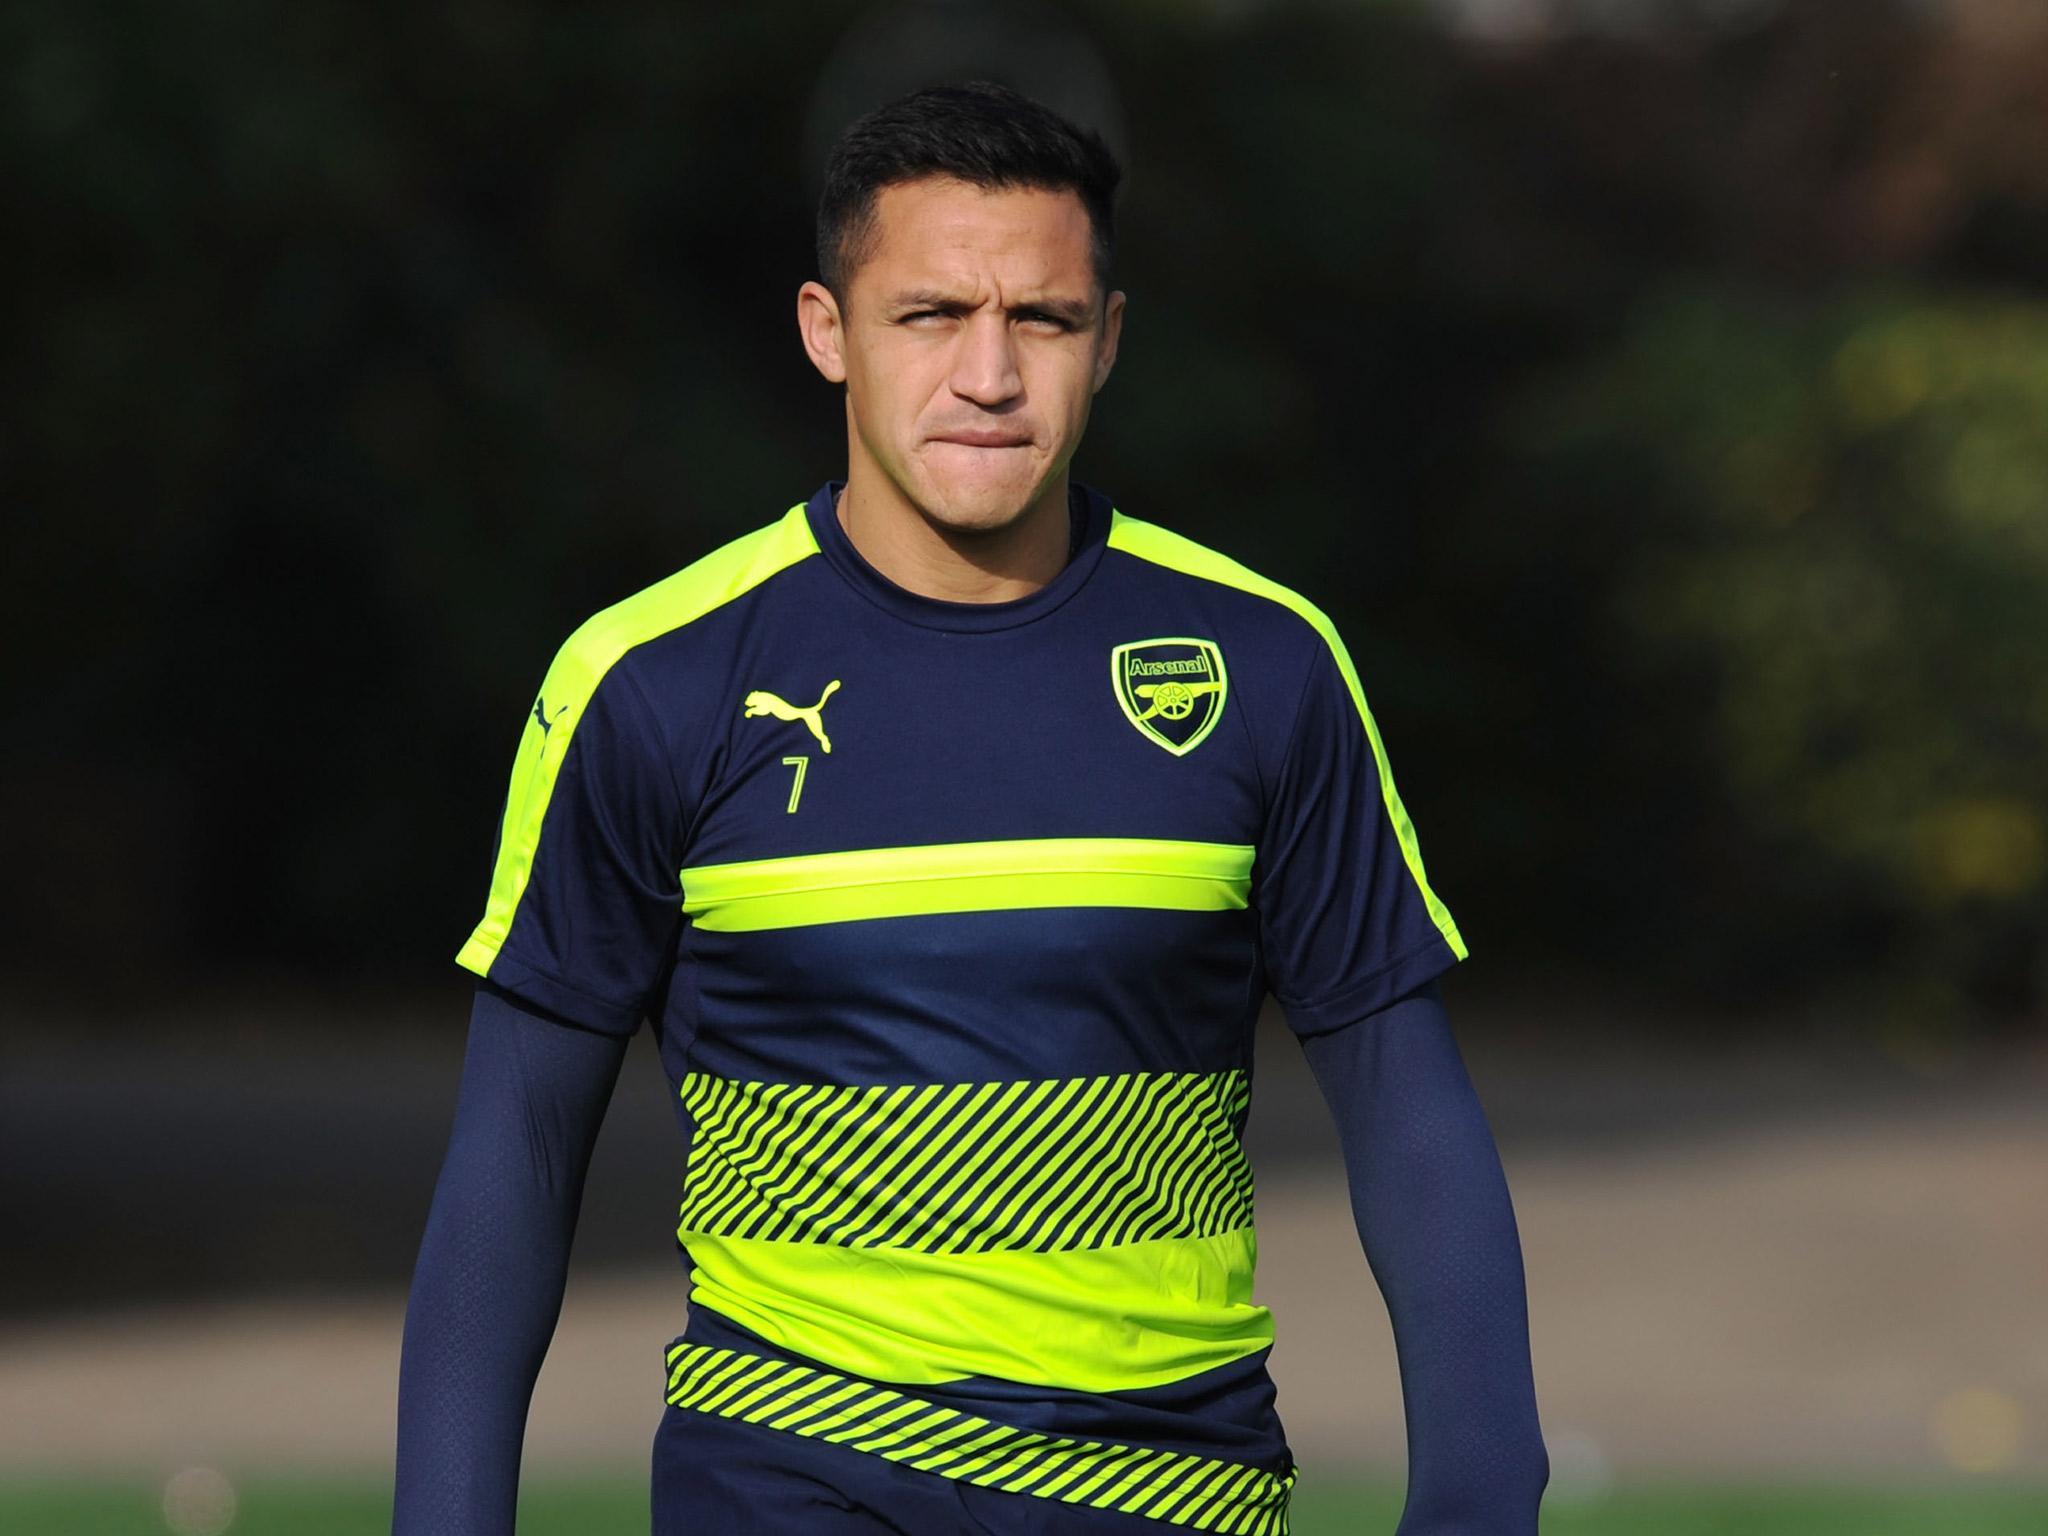 Sanchez has been in contract talks with Arsenal since August